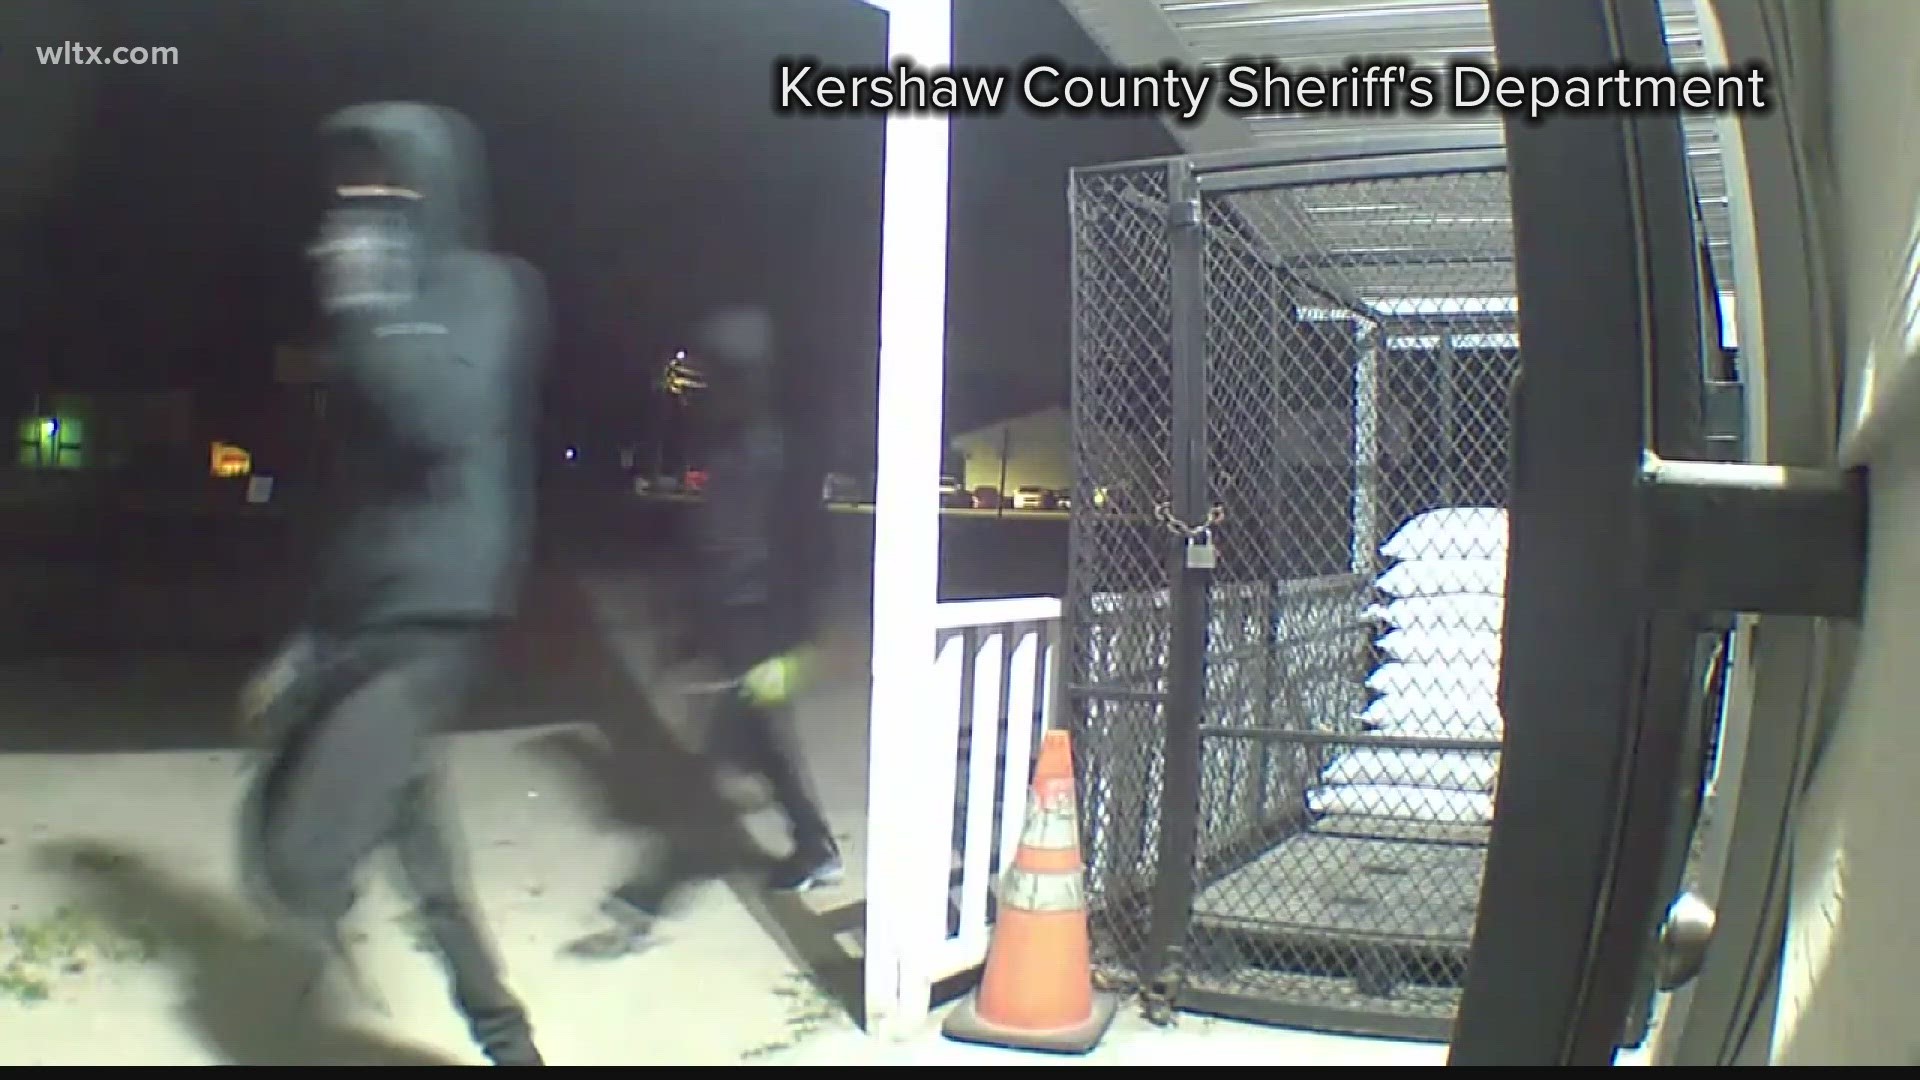 Ten more illegally obtained guns are on the streets in Kershaw County after a midweek break-in at a gun store. The sheriff has released a video of the suspects.